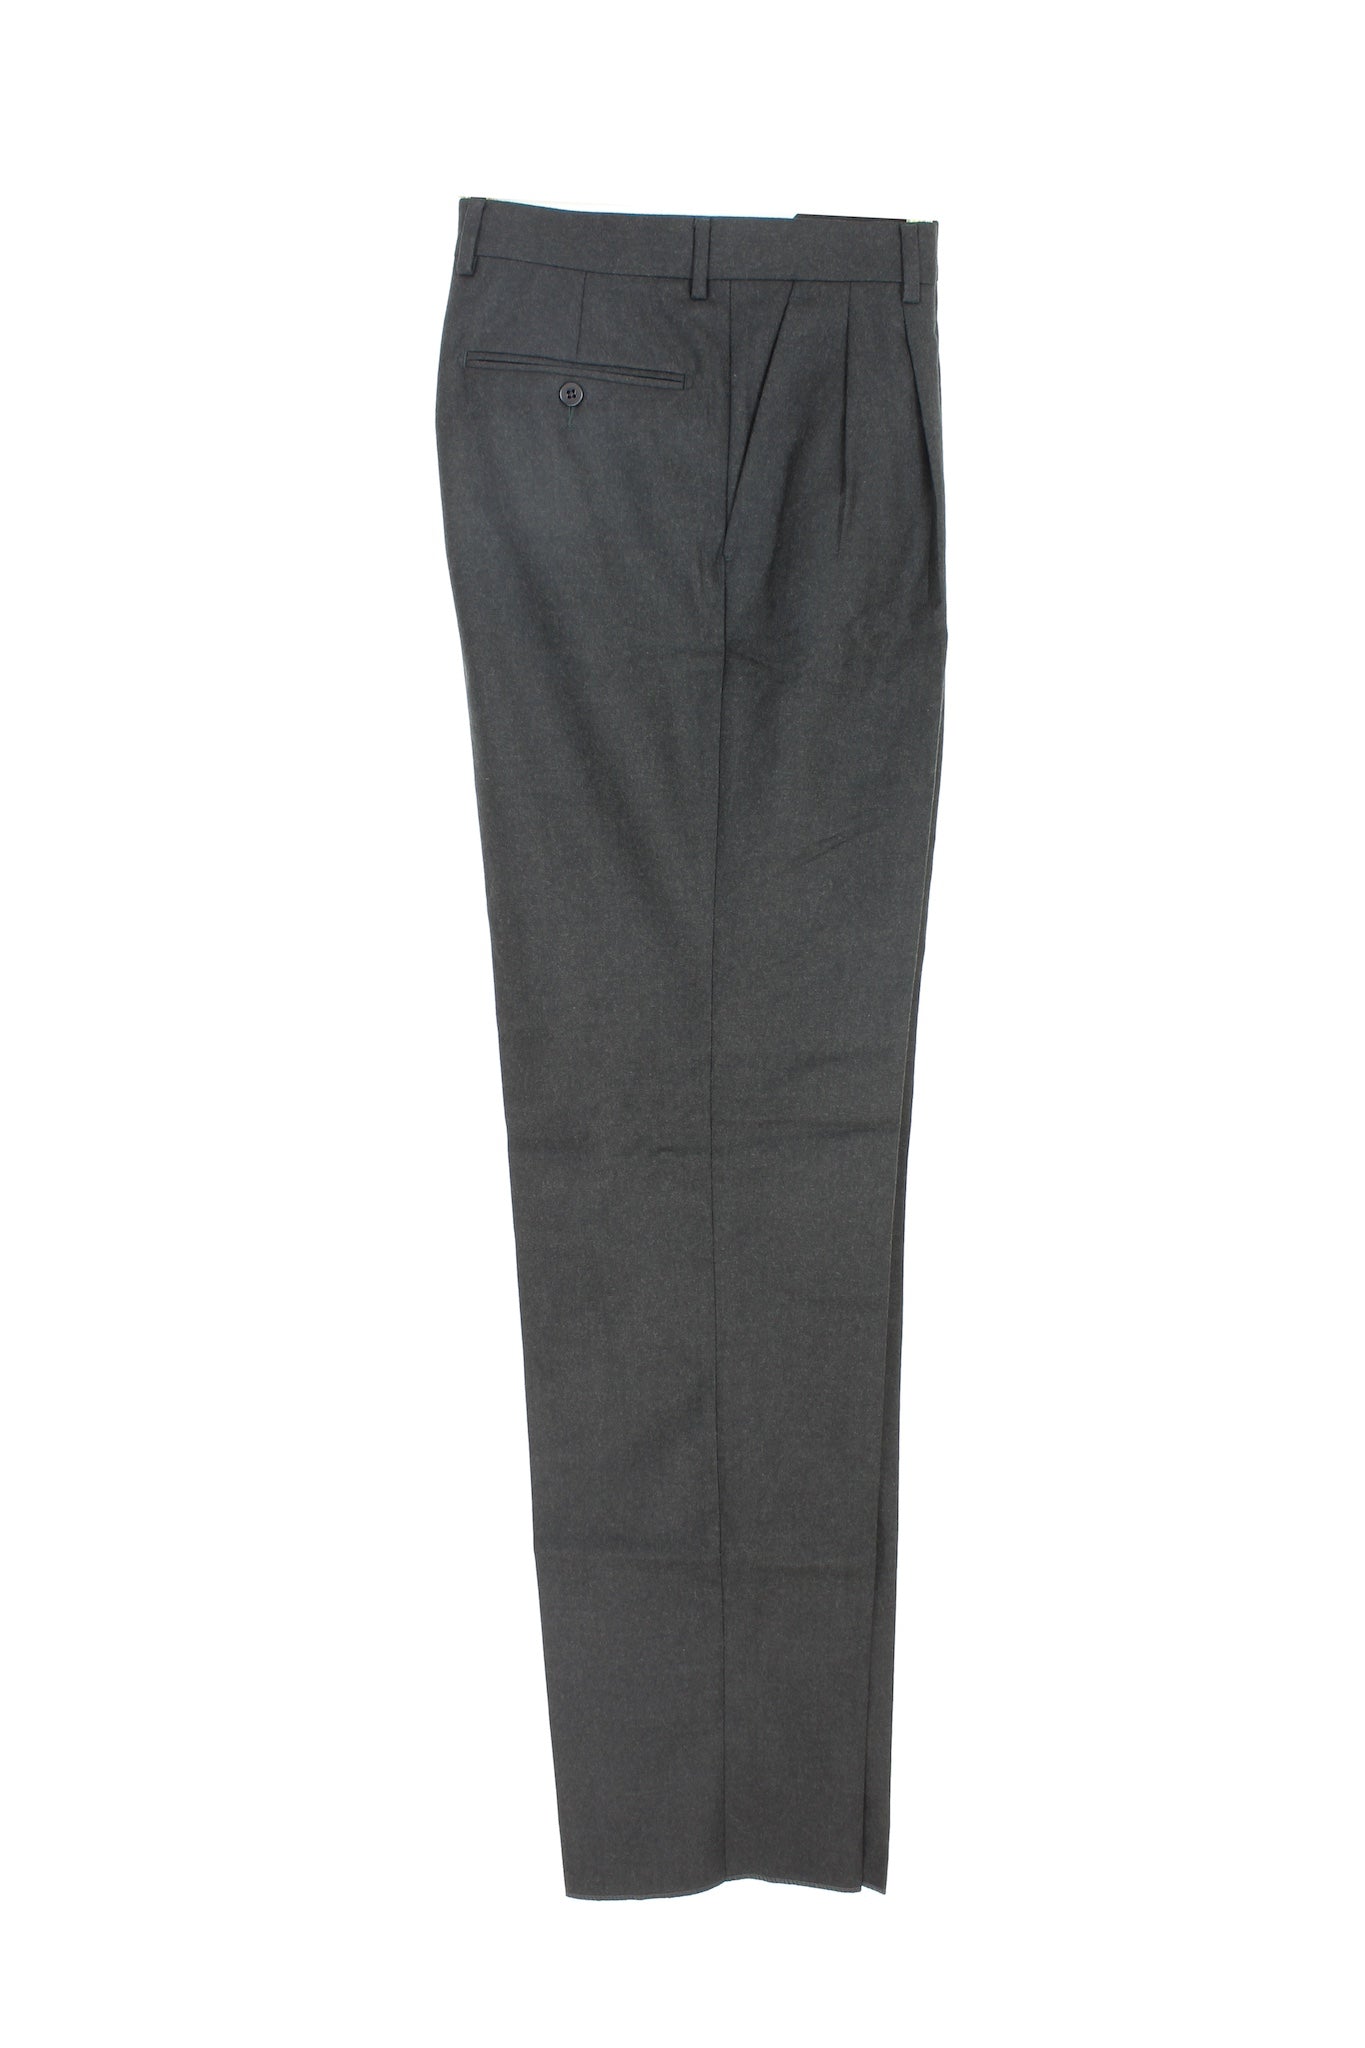 Burberry Wool Grey Trousers Vintage 90s